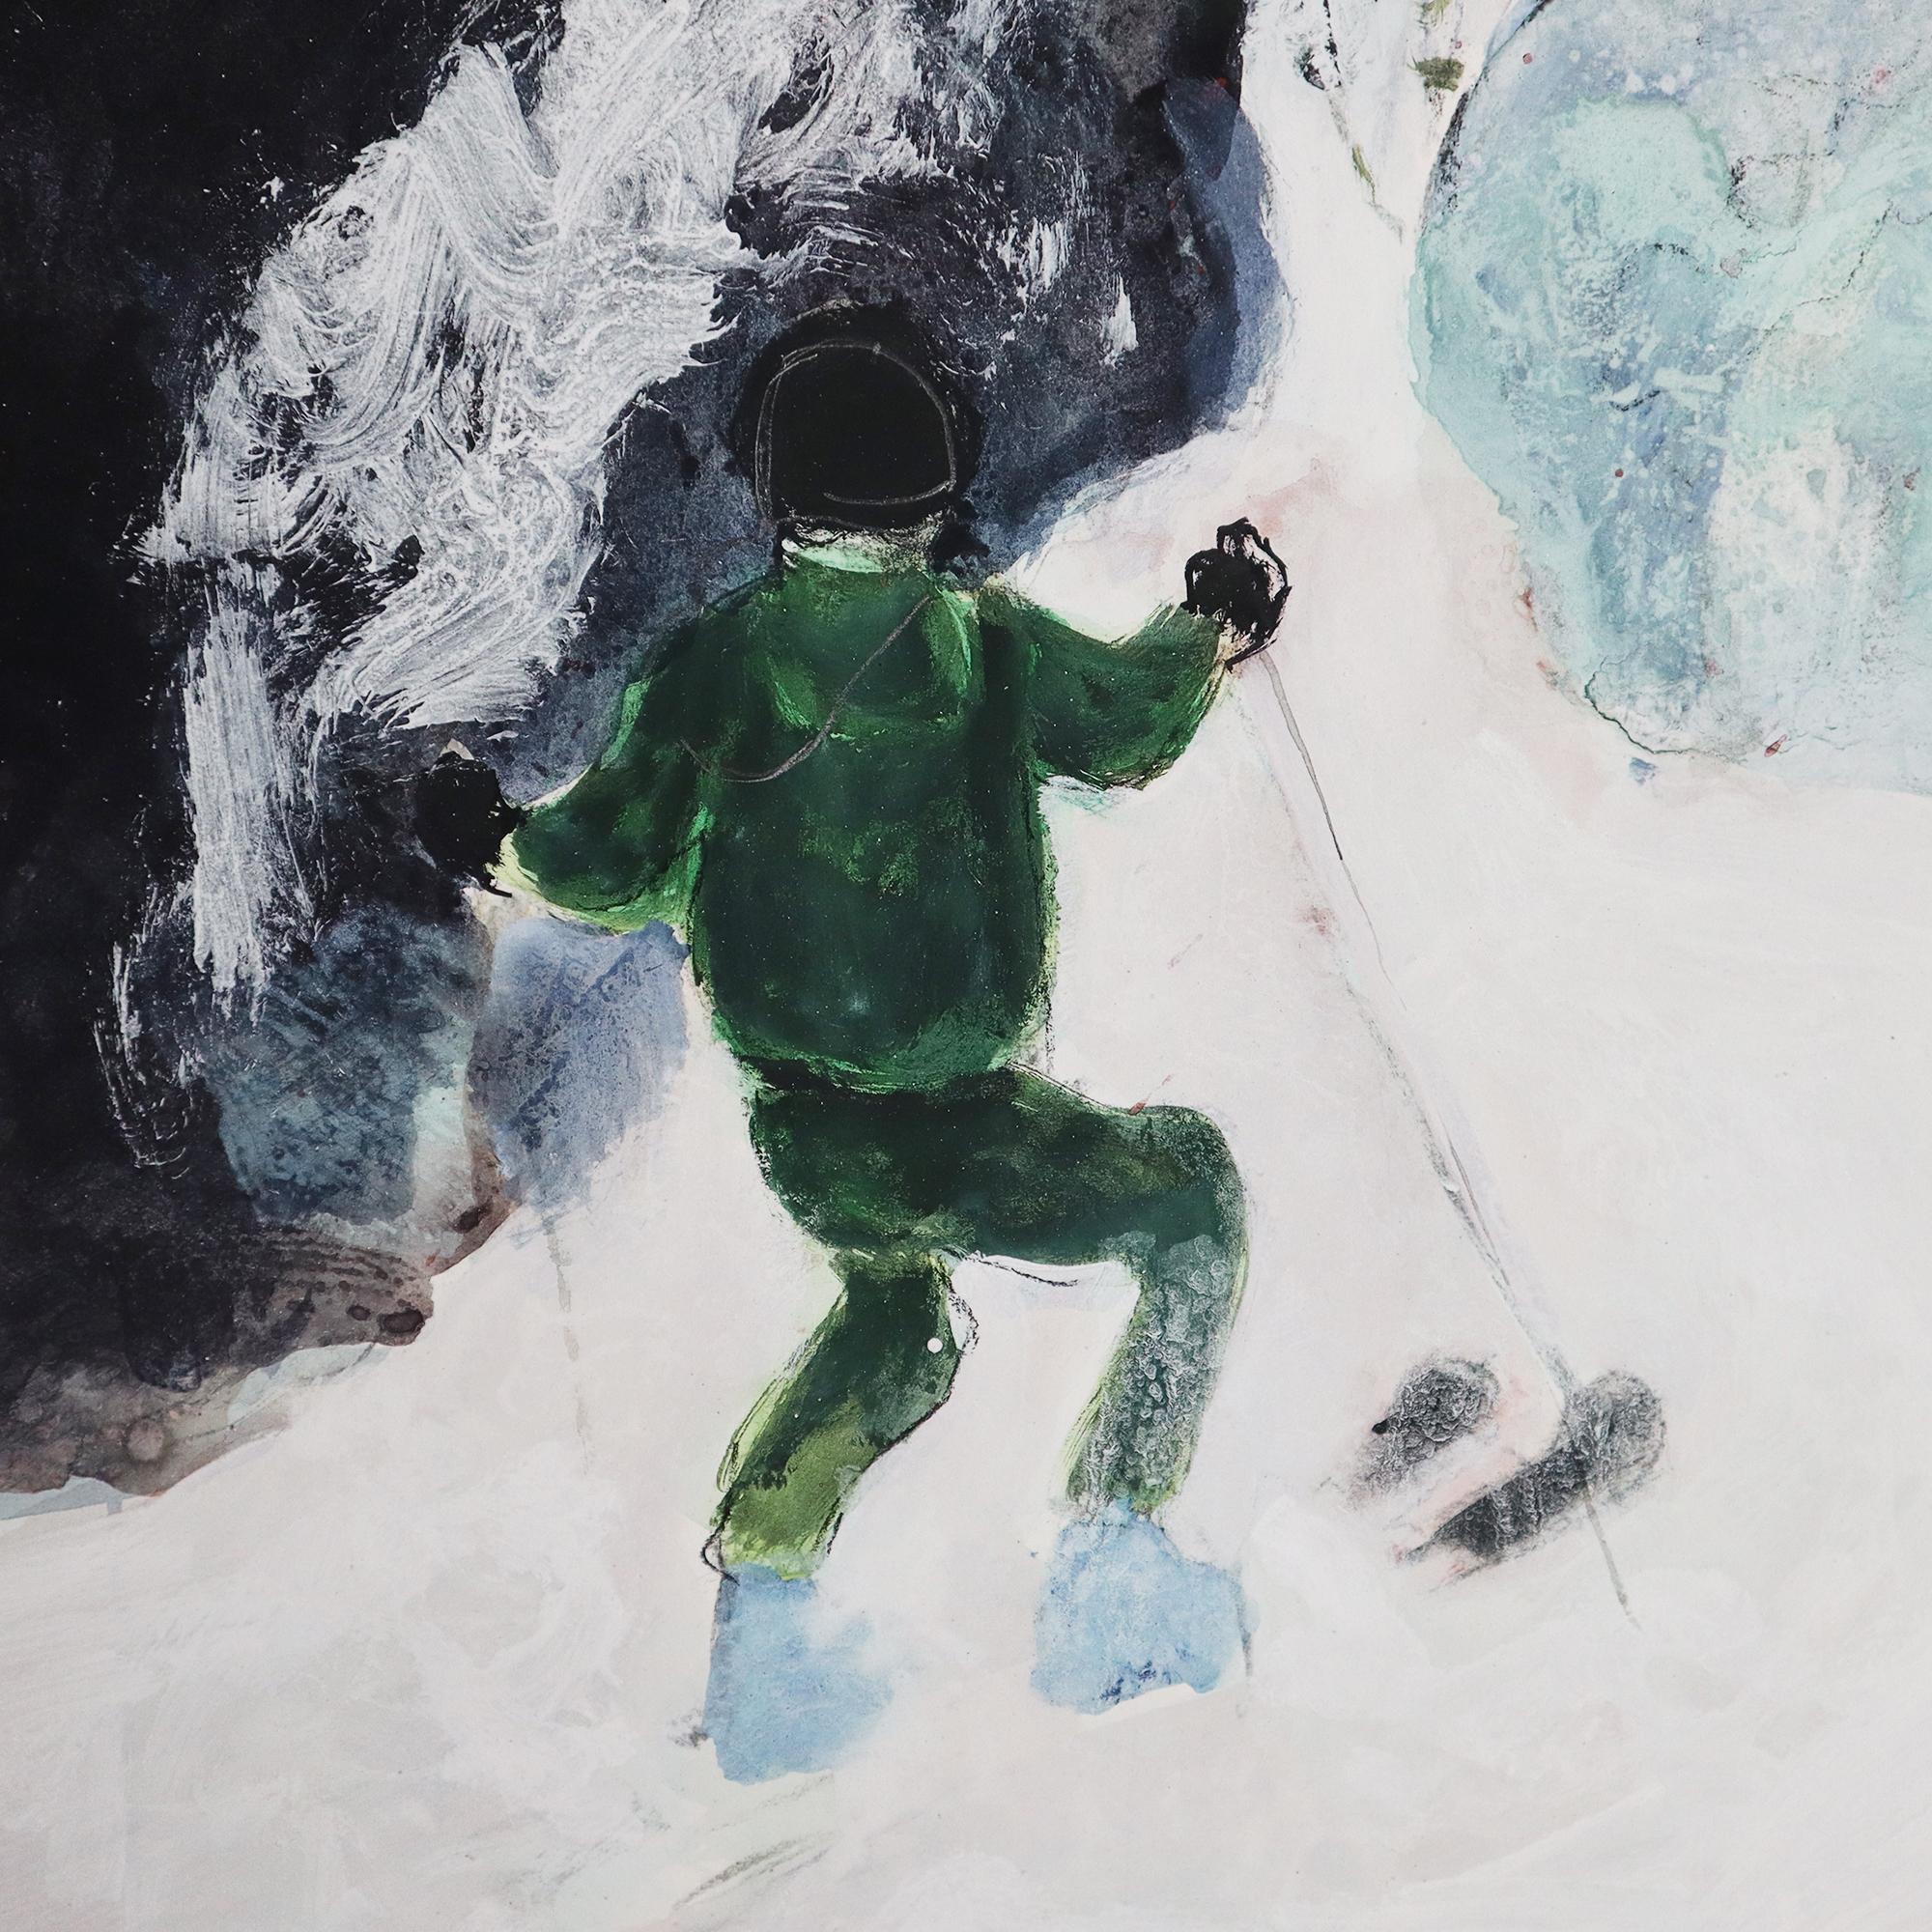 Peter Doig 
D1-1 Couloir 1, 2022
114 x 80 cm
Edition Size 250 + 25 APs, each numbered and hand signed
Giclée Print on Cotton Smooth Rag
Oak frame with Optium Tru Vue Acrylic Glass
In mint condition 

PLEASE NOTE: Images of edition number are example